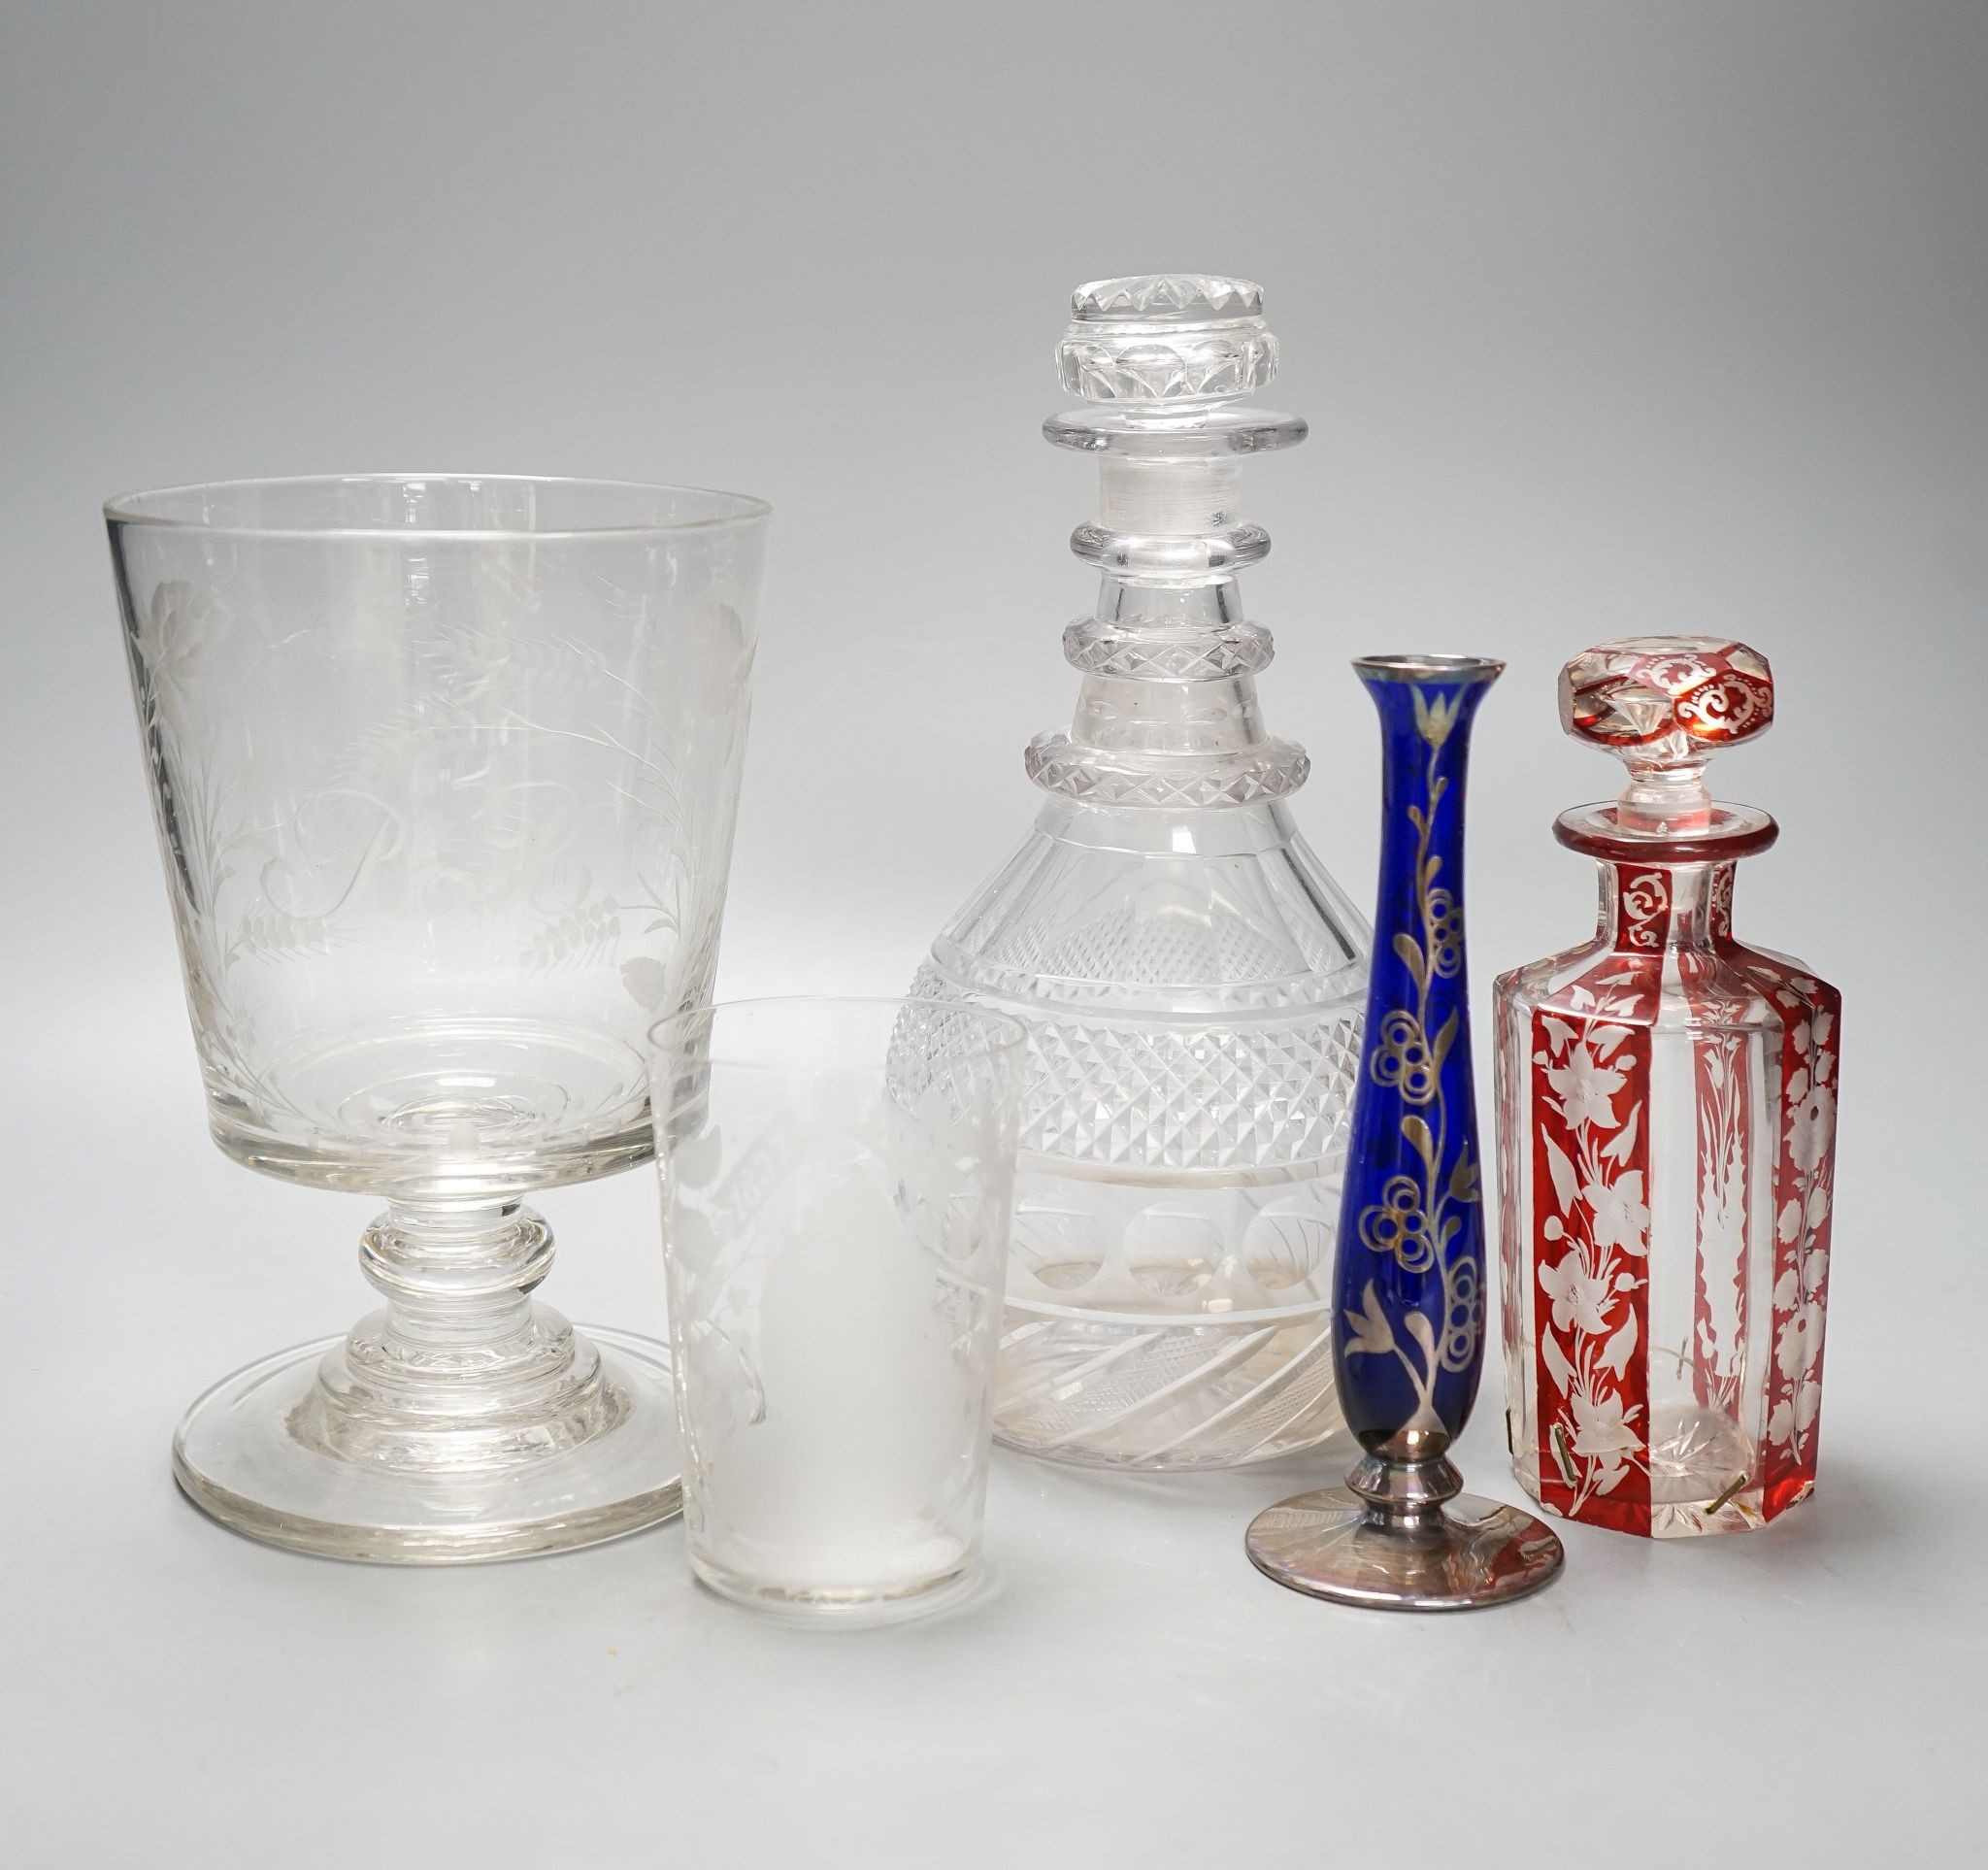 A George III large presentation glass rummer, a Regency decanter and other items (5) 25cm